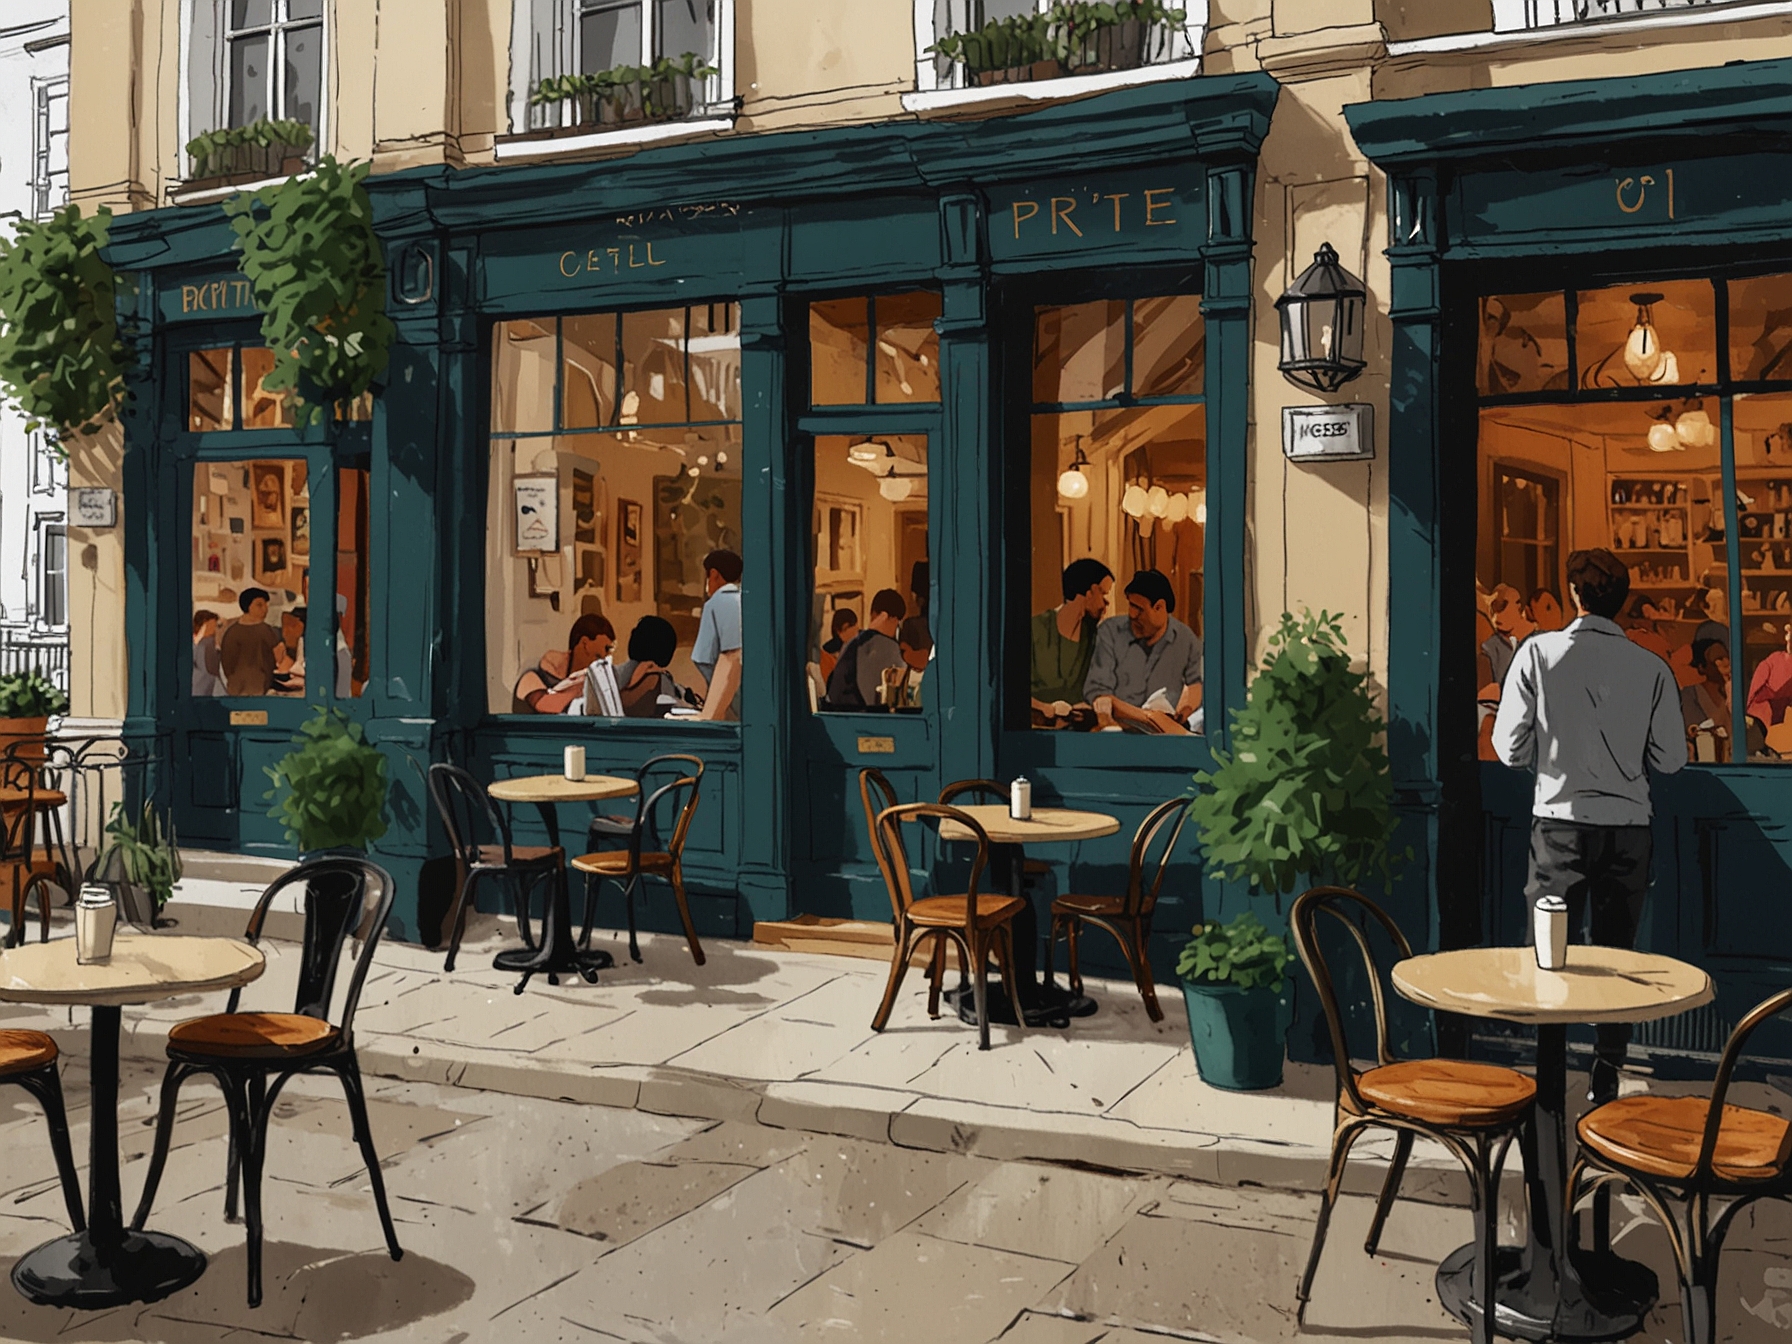 A cozy cafe named 'Hidden Gem' in Notting Hill. The scene shows a warm interior with patrons enjoying artisanal coffee and pastries, providing a serene oasis amidst the bustling city.